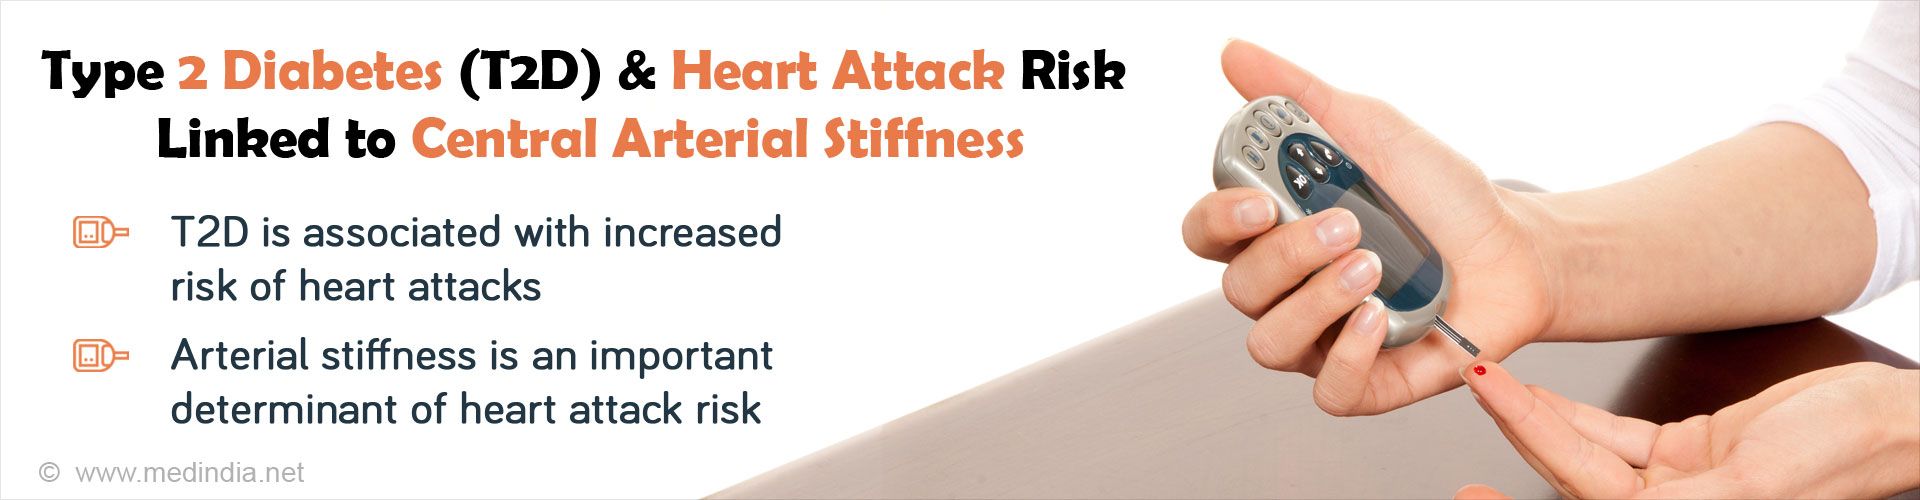 Type 2 Diabetes (T2D) & Heart Attack Risk Linked to Central Arterial Stiffness
- T2D is associated with increased risk of heart attacks
- Arterial stiffness is an important determinant of heart attack risk